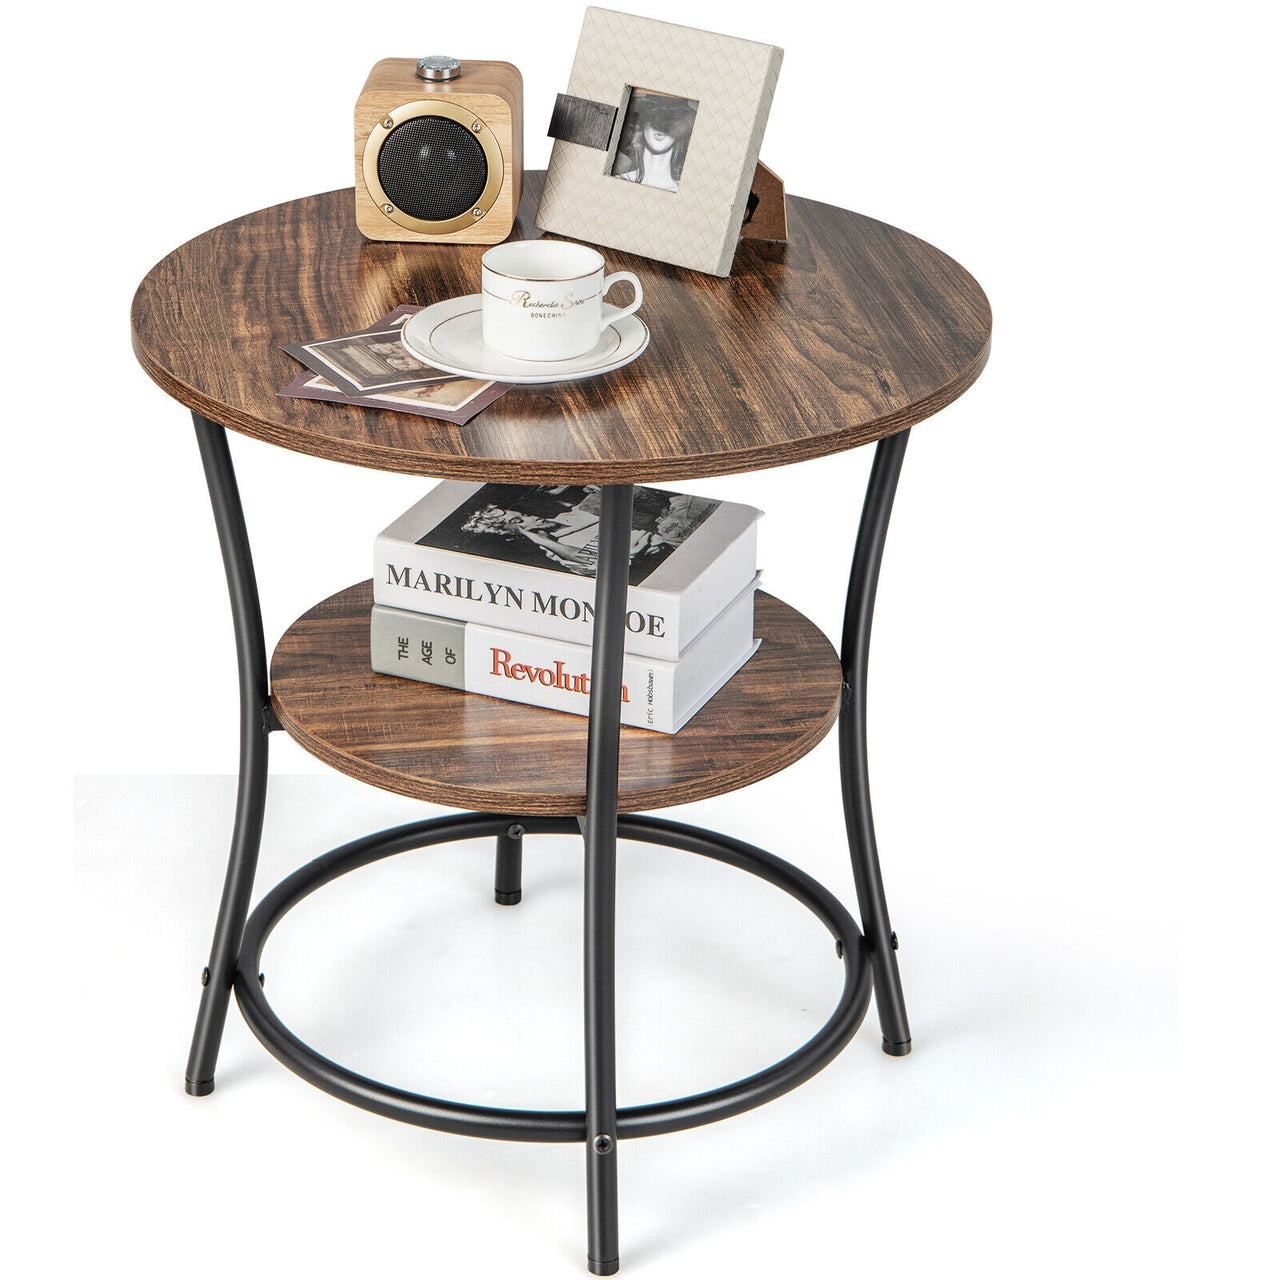 2-Tier Round End Table with Open Storage Shelf and Sturdy Metal Frame - Gallery View 1 of 9